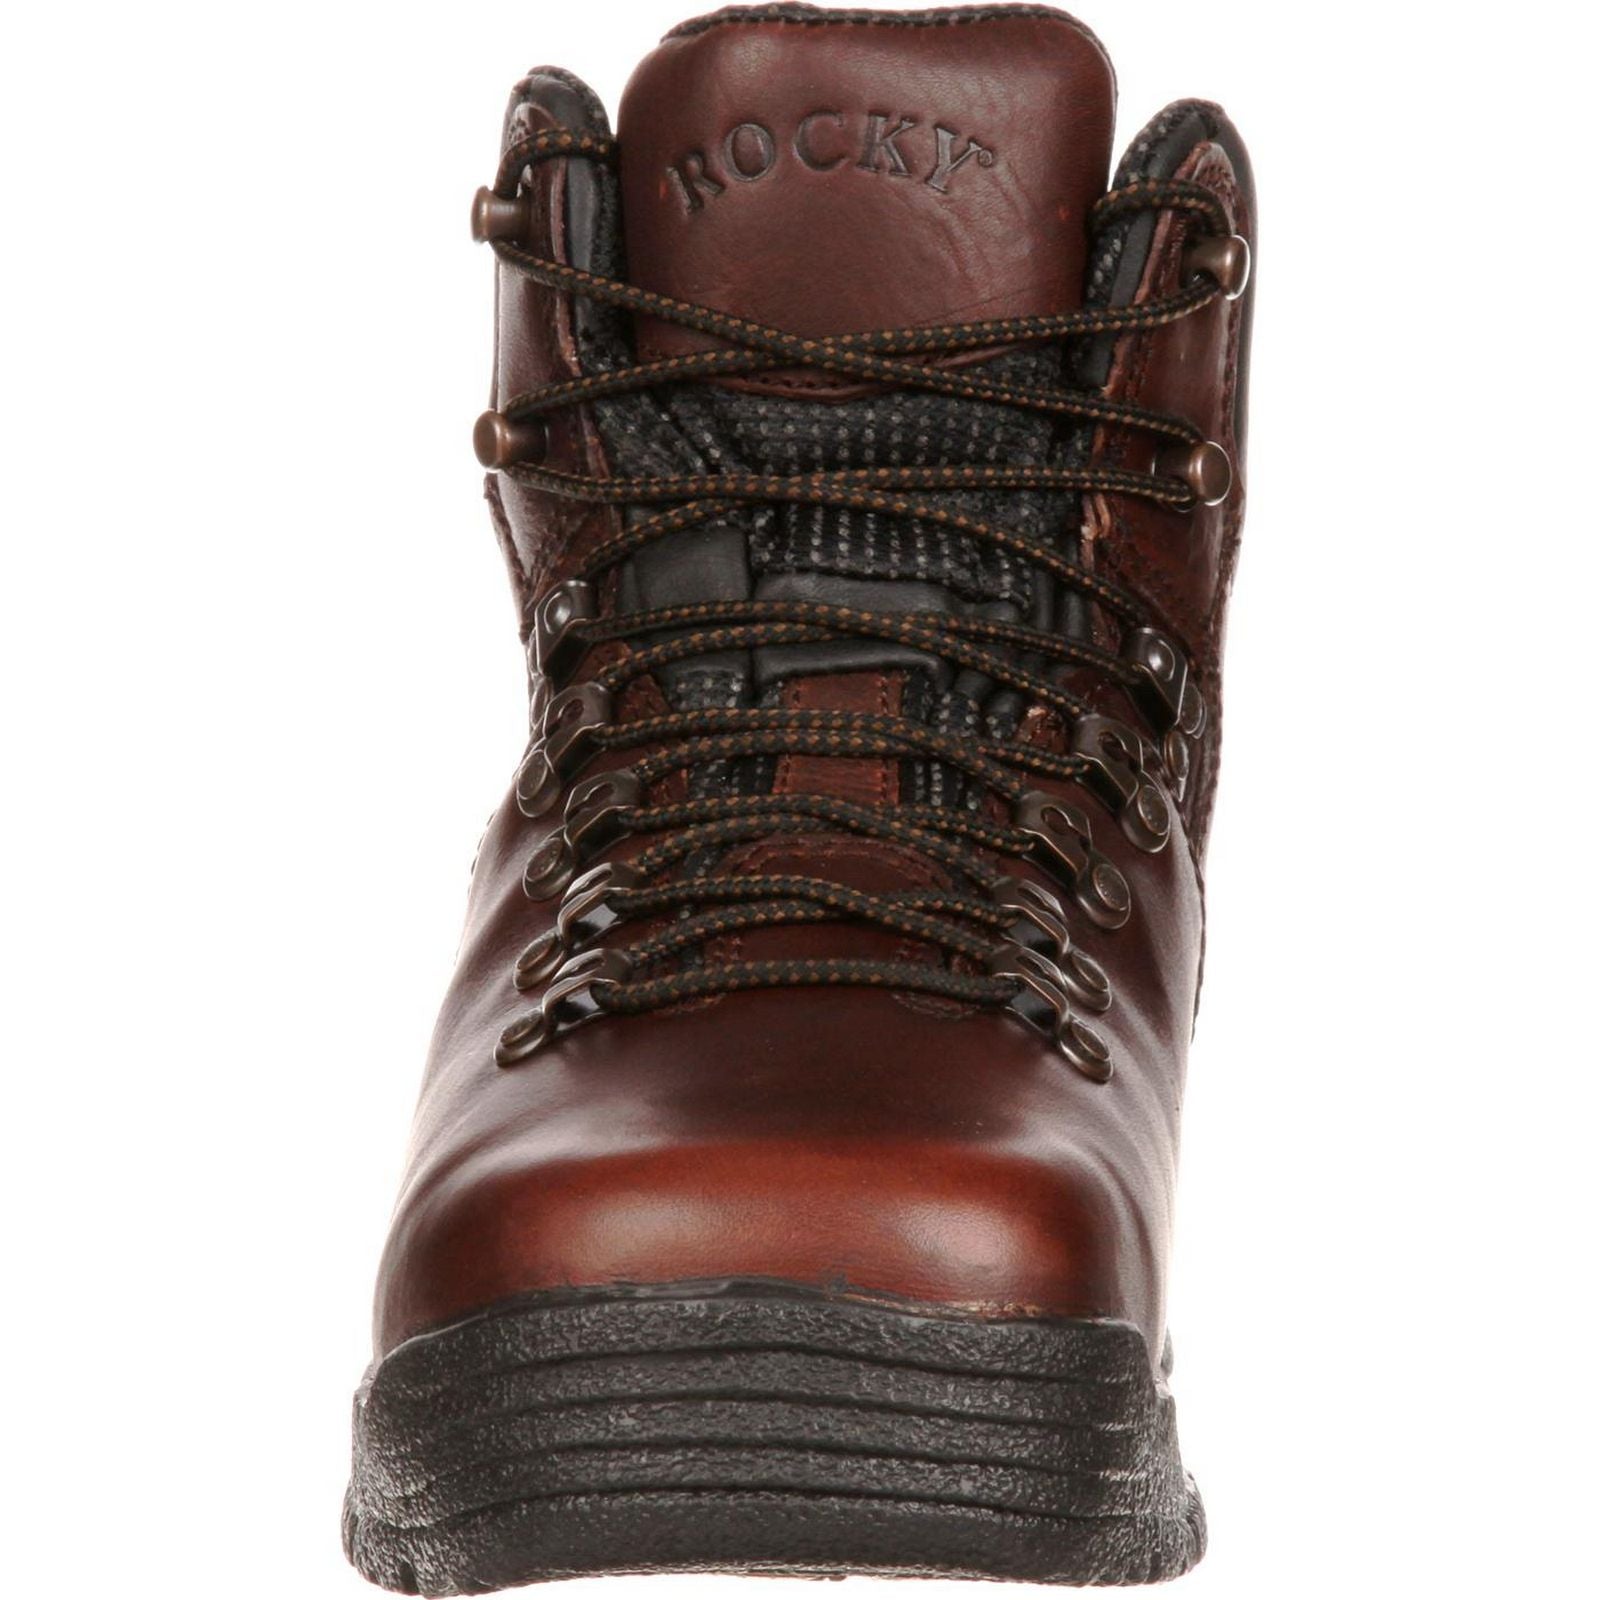 rocky mobilite boots